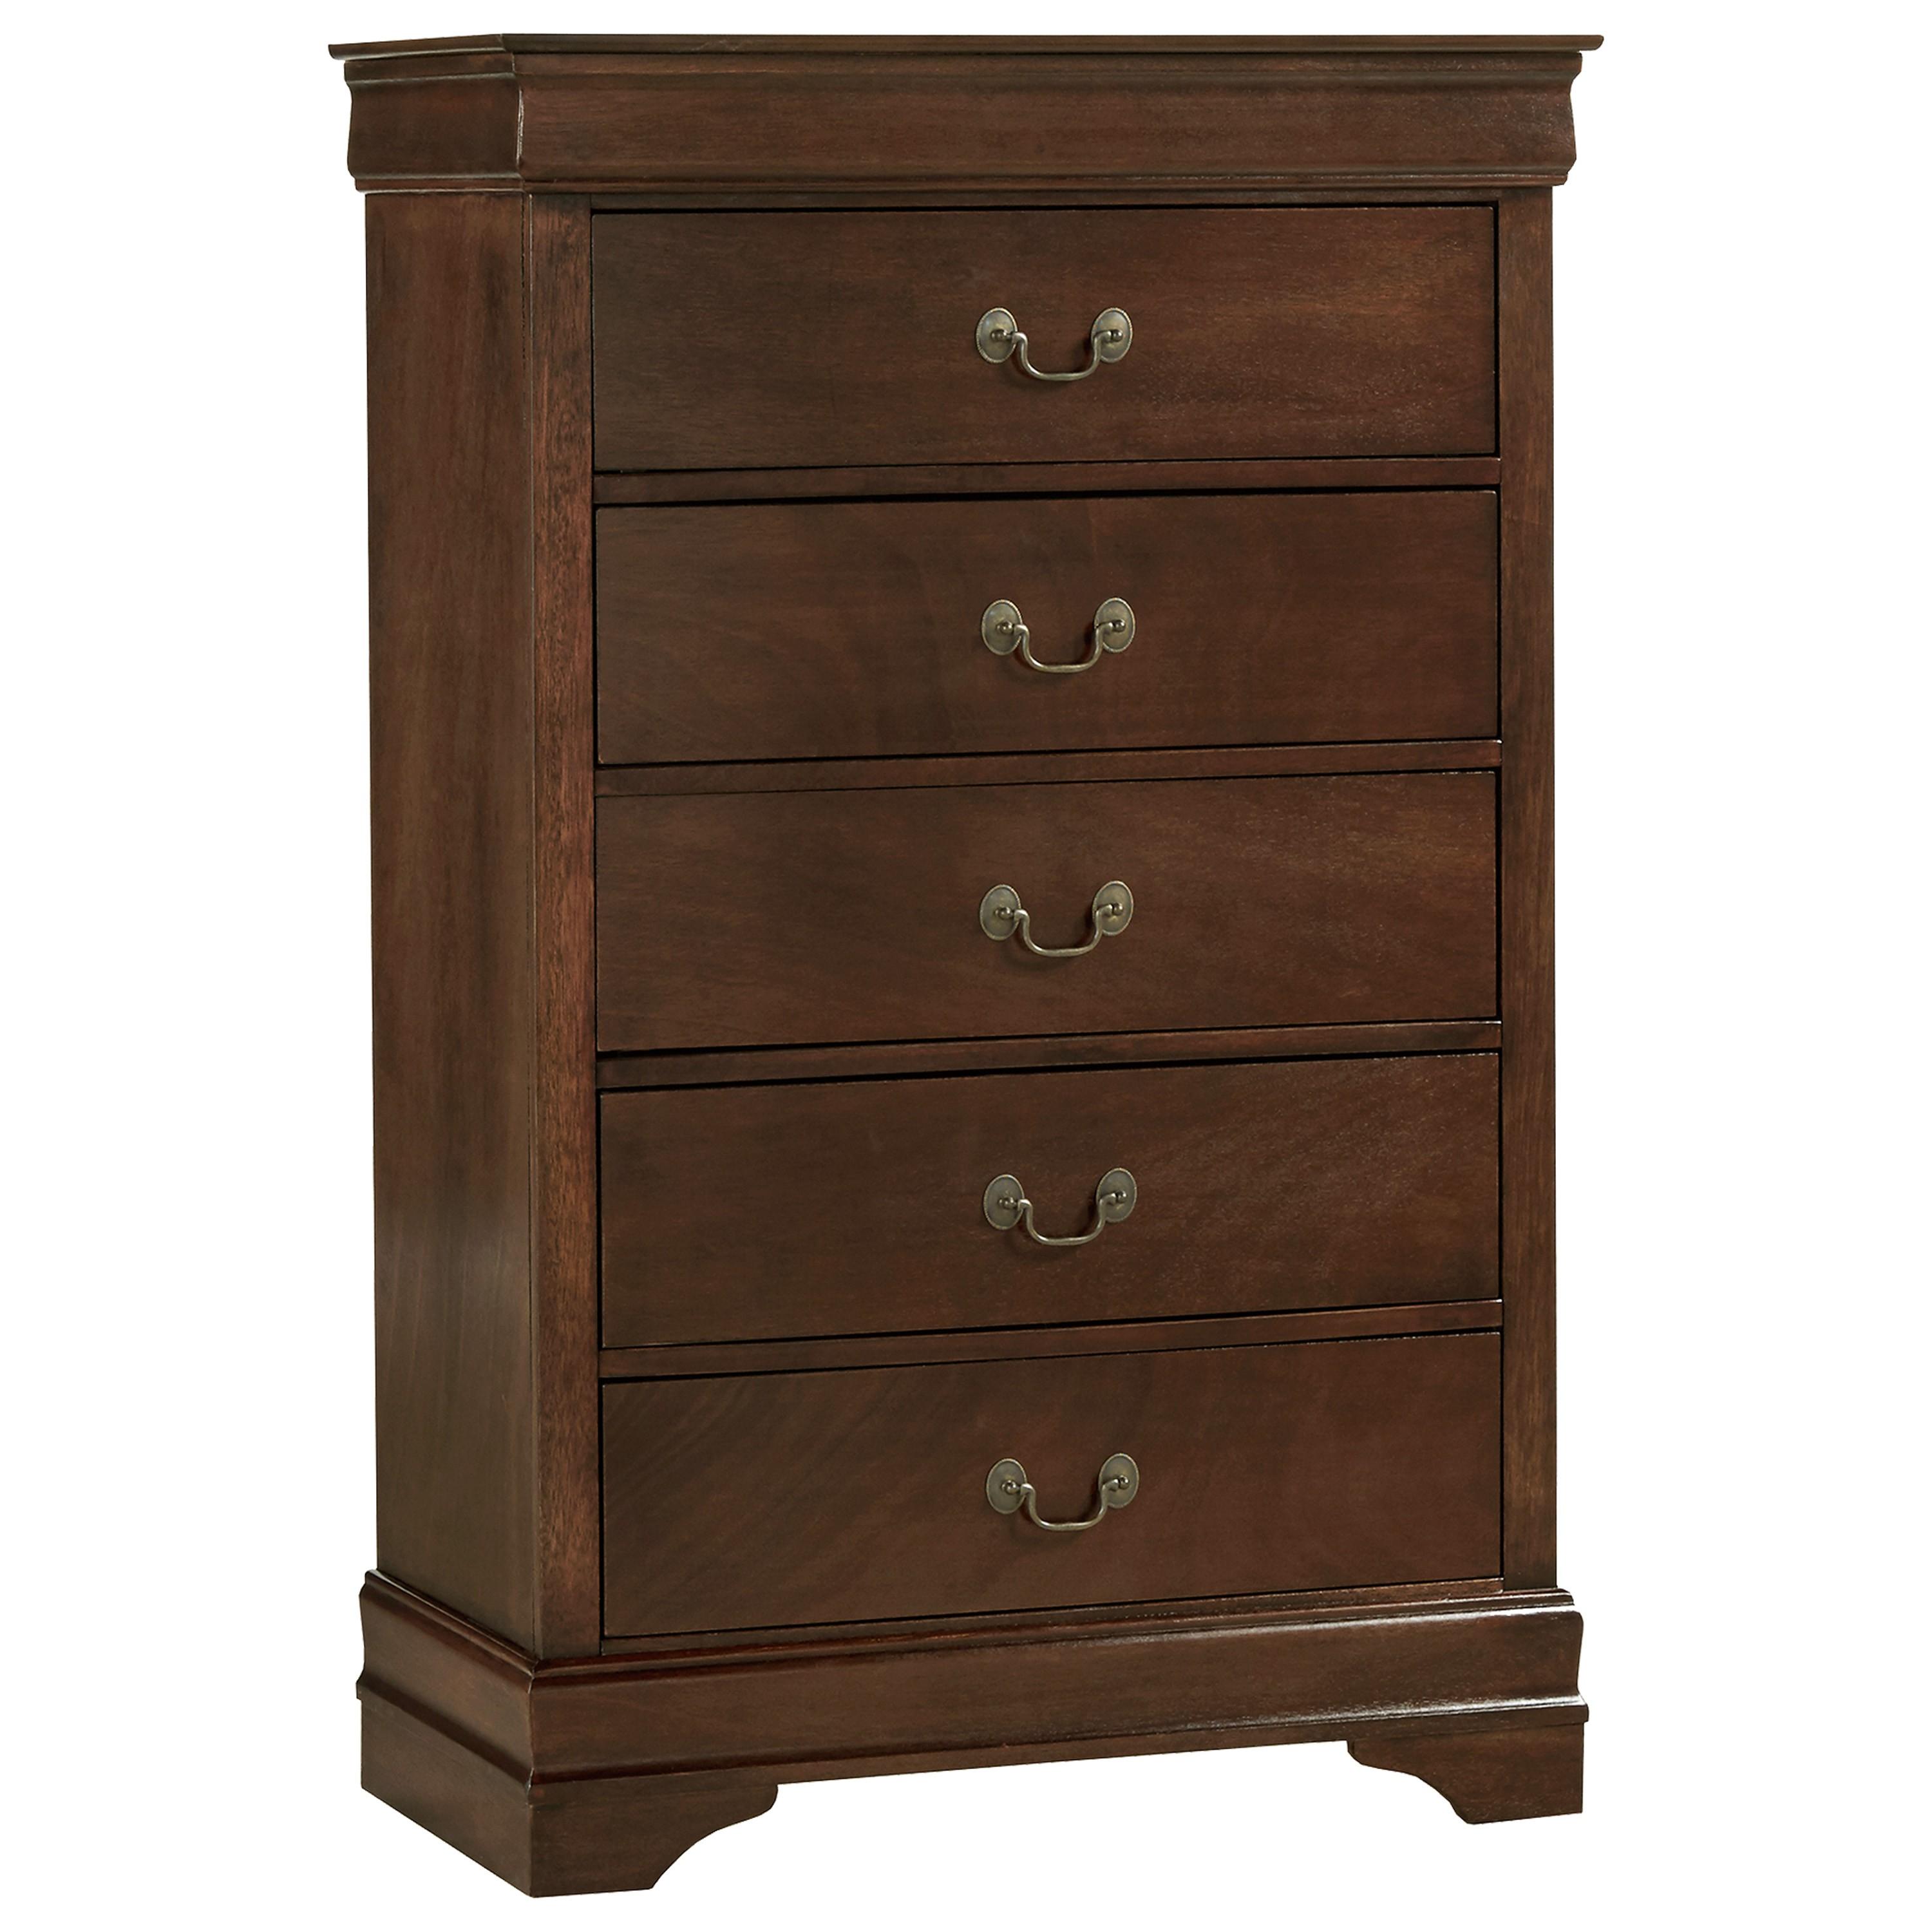 Traditional Chest 2147-9 Mayville 2147-9 in Cherry 